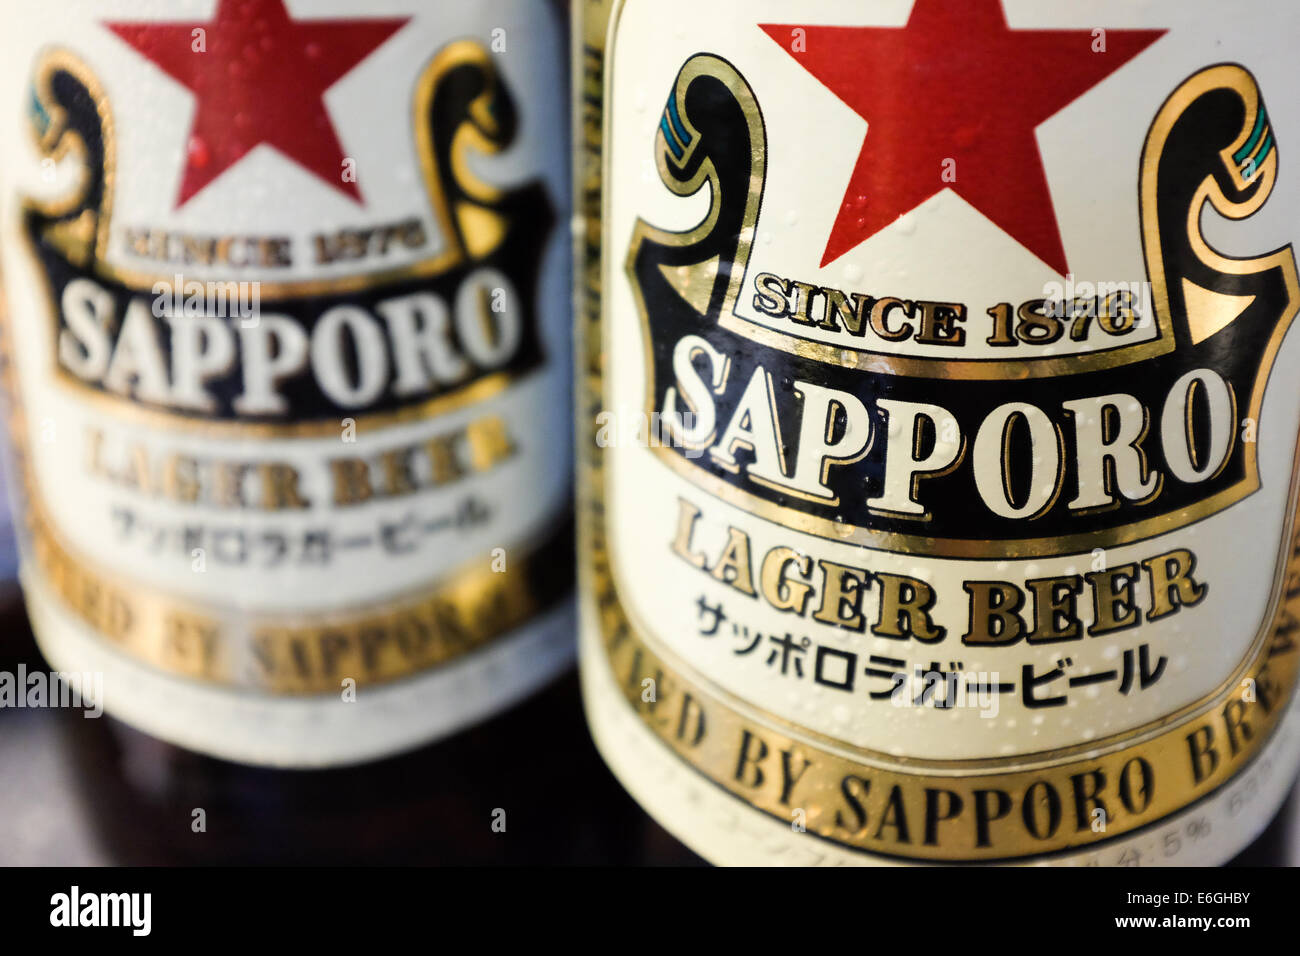 Two bottles of Japan-made Sapporo beer. Stock Photo